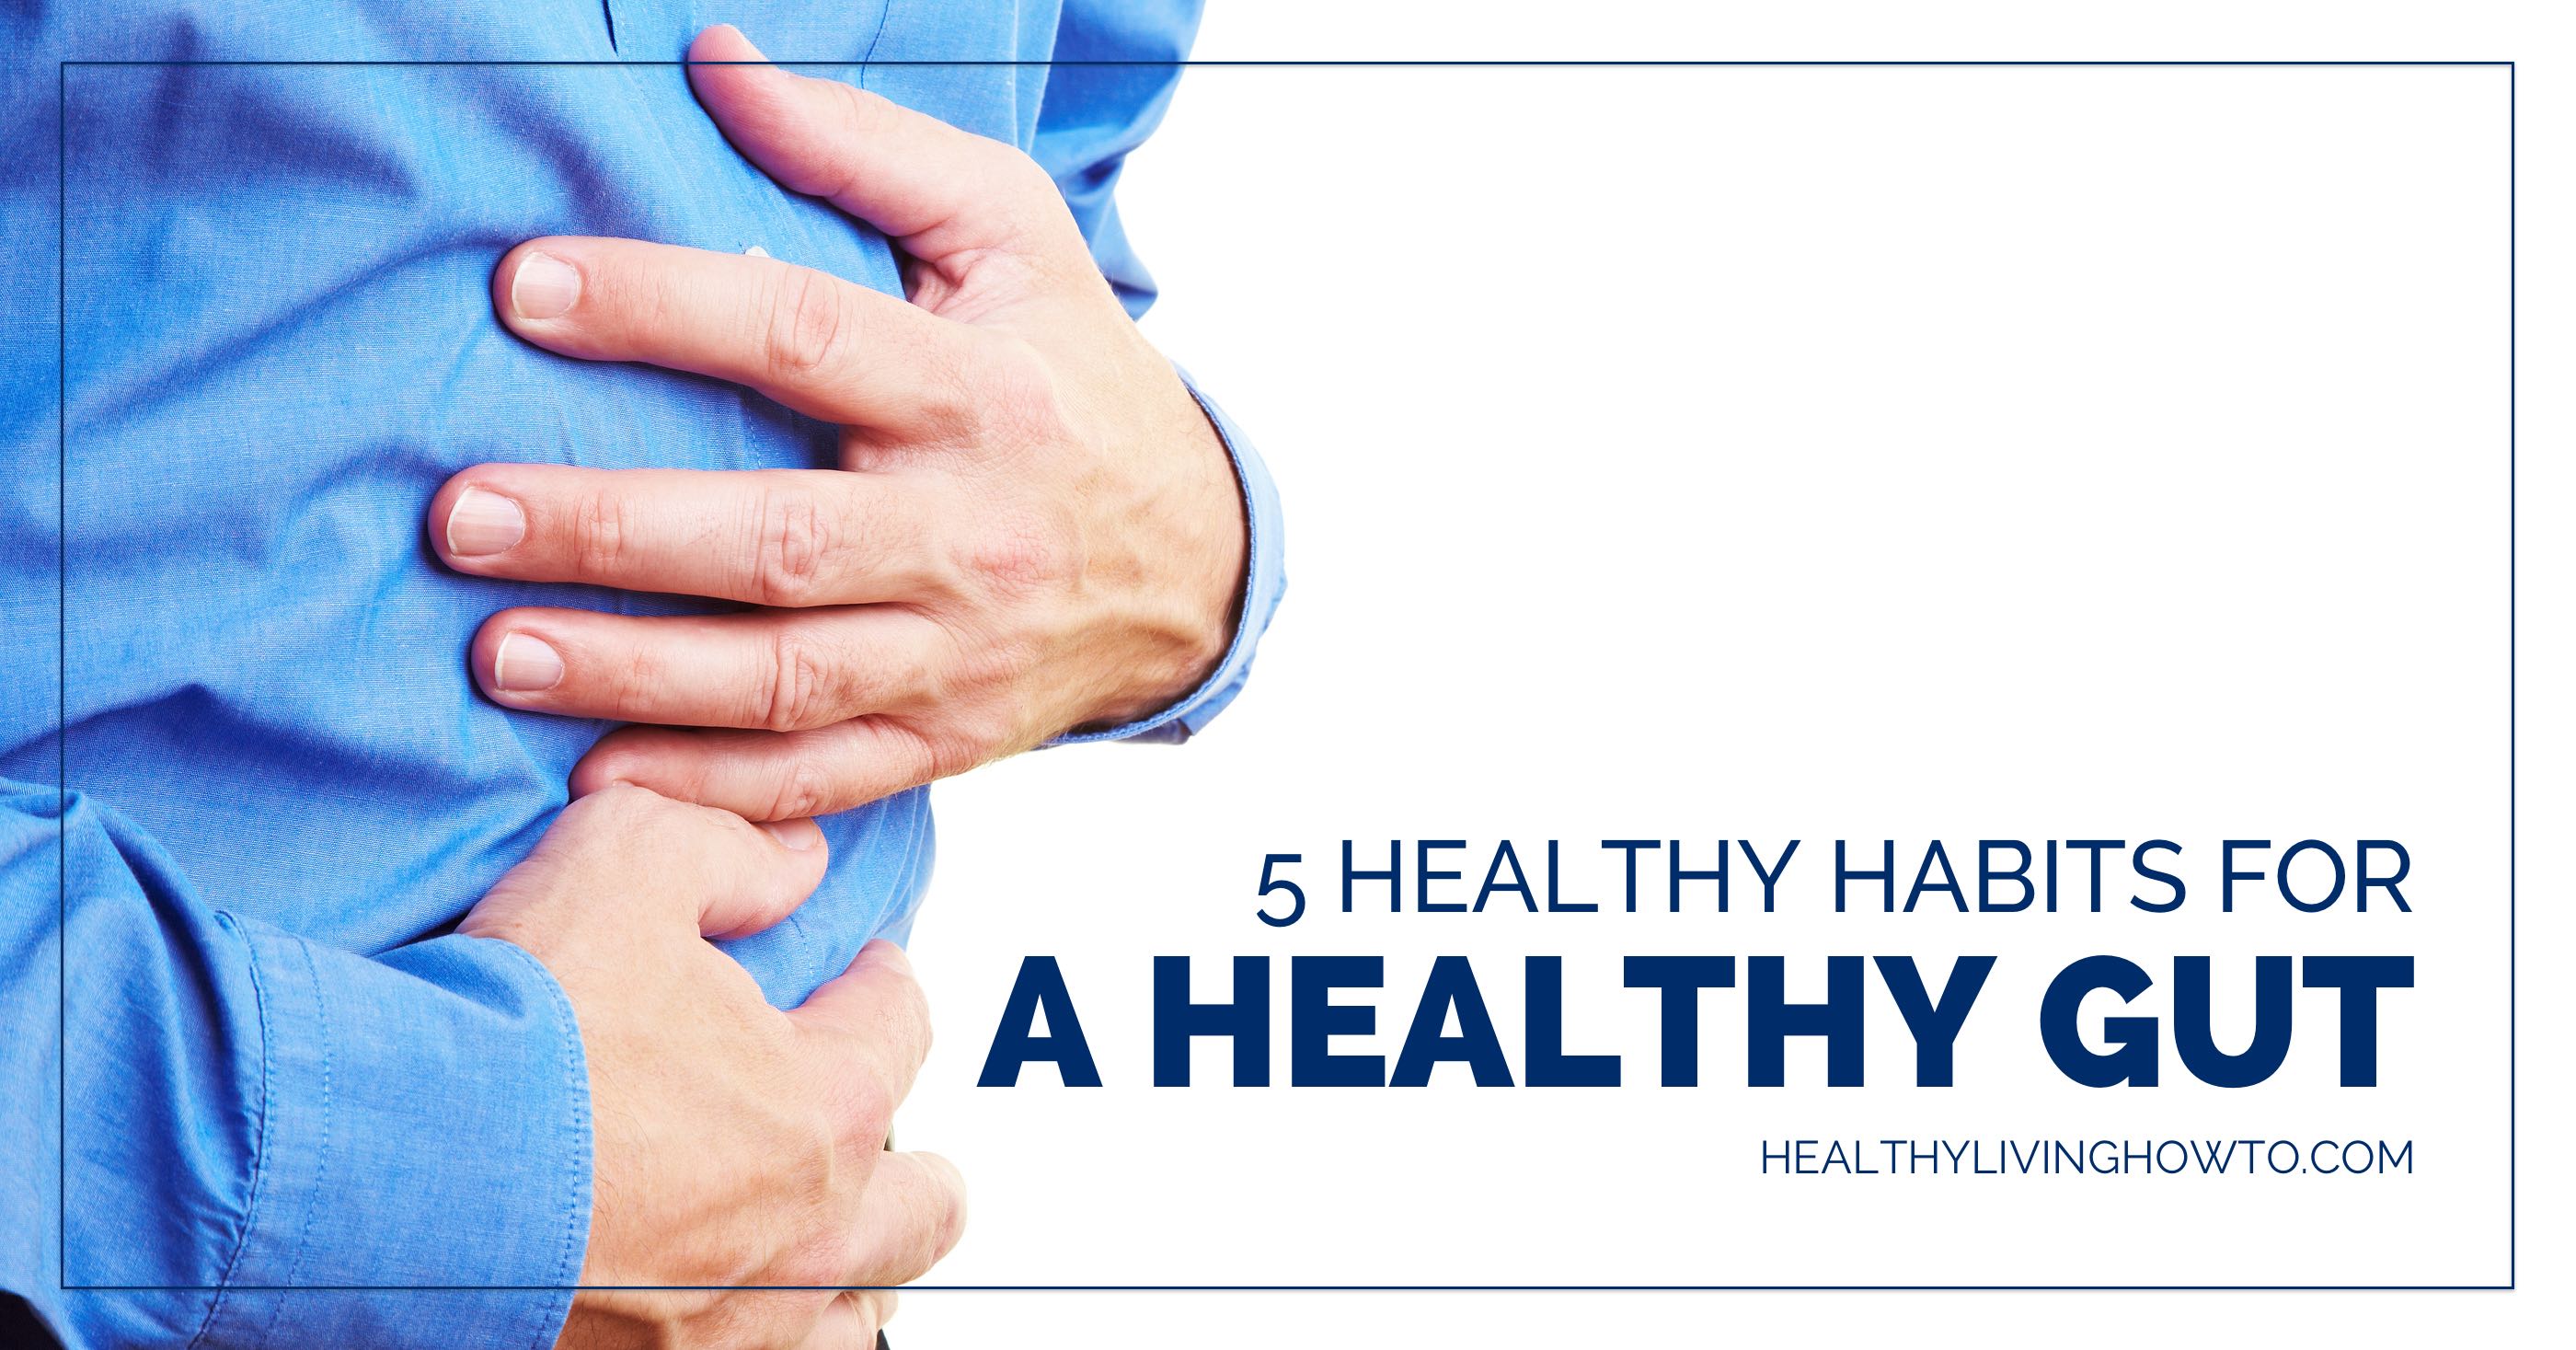 5 Healthy Habits for a Healthy Gut | healthylivinghowto.com